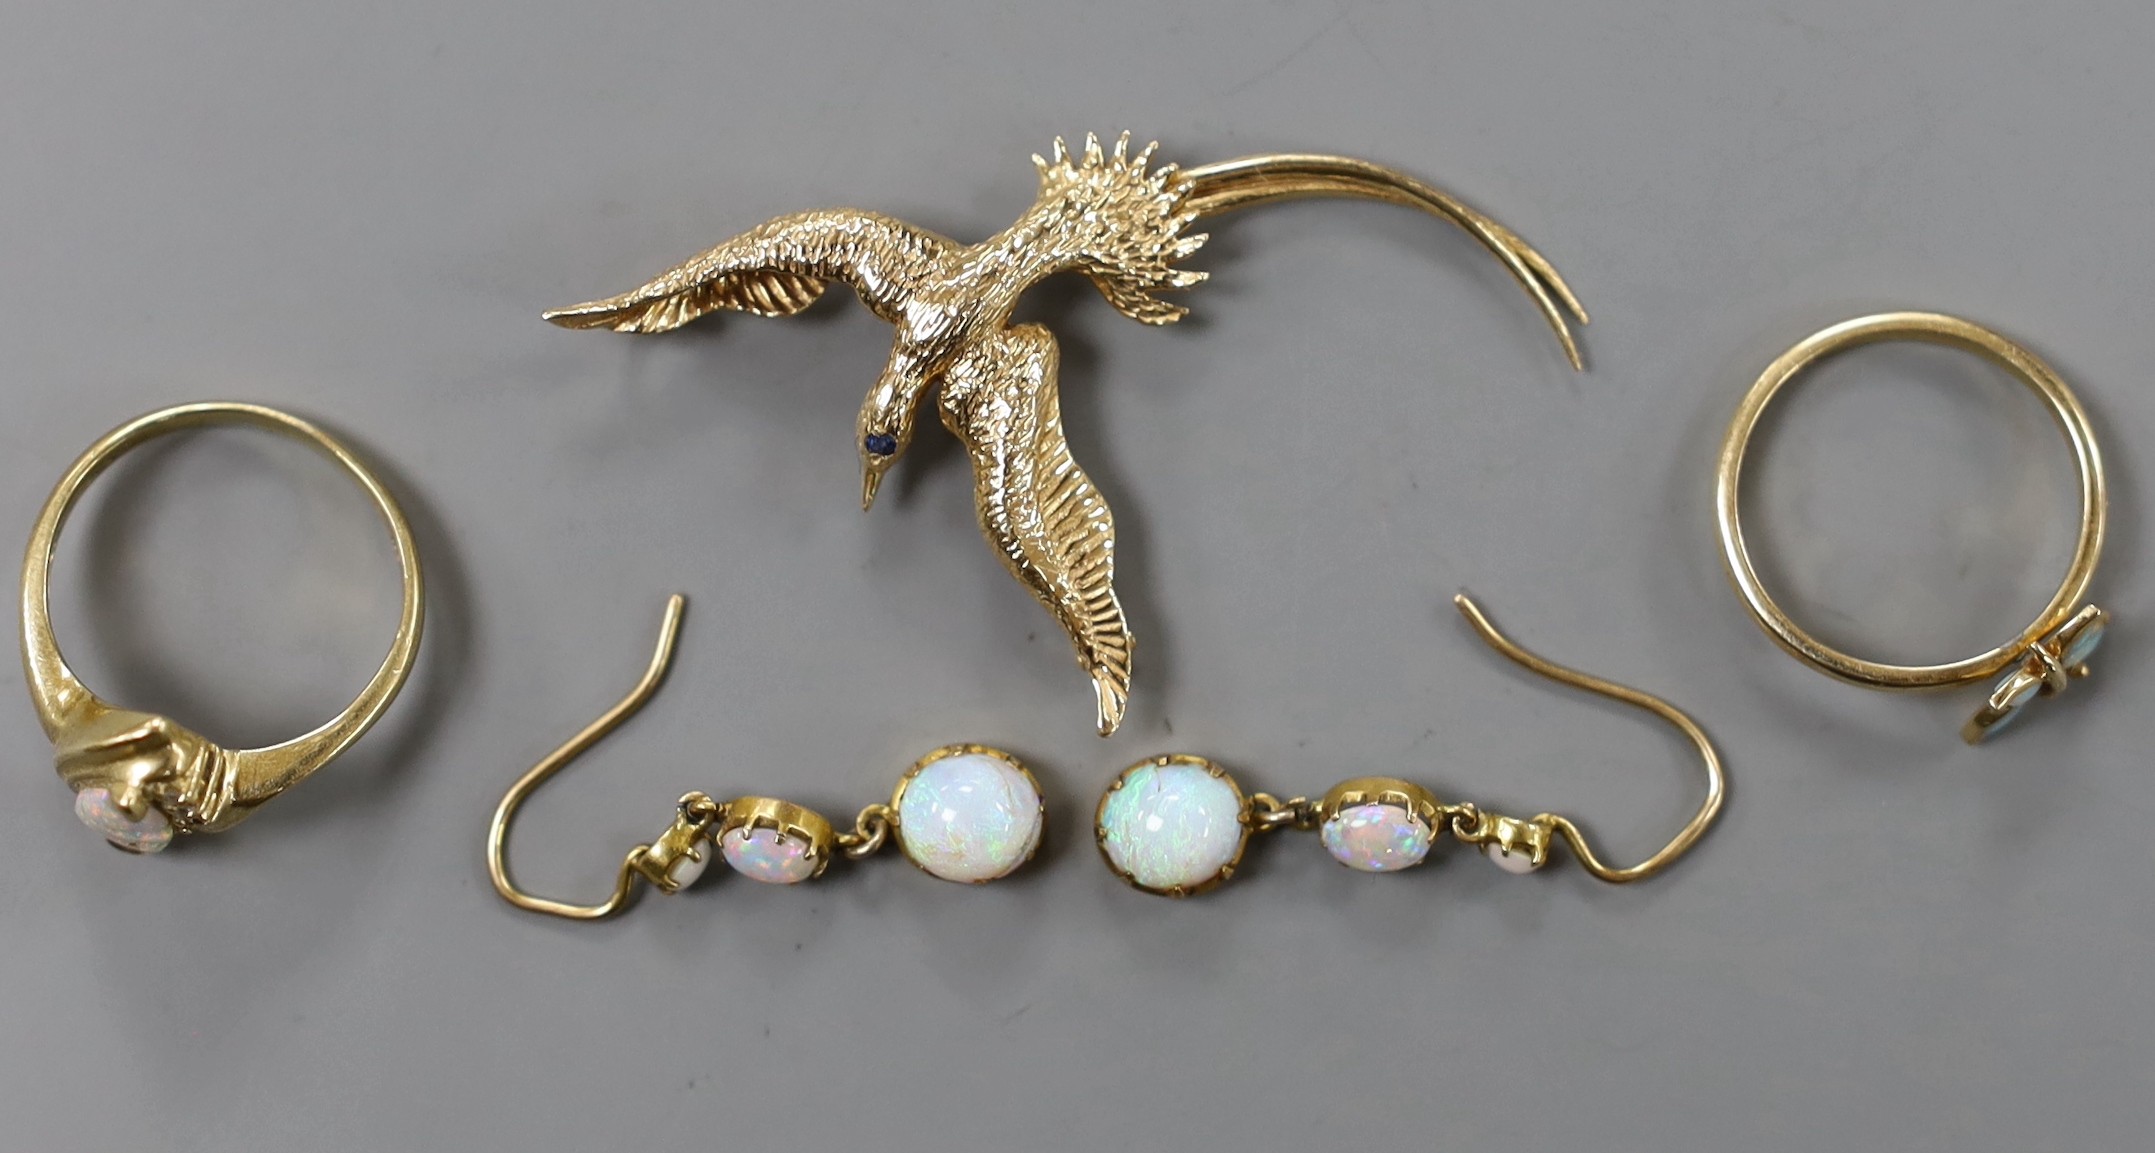 A 14k and gem set 'bird in flight' brooch, 50mm, gross weight 4.1 grams, a 9k and white opal ring, pair of yellow metal and white opal drop earrings and a yellow metal and white opal 'butterfly' ring, gross 6.4 grams.